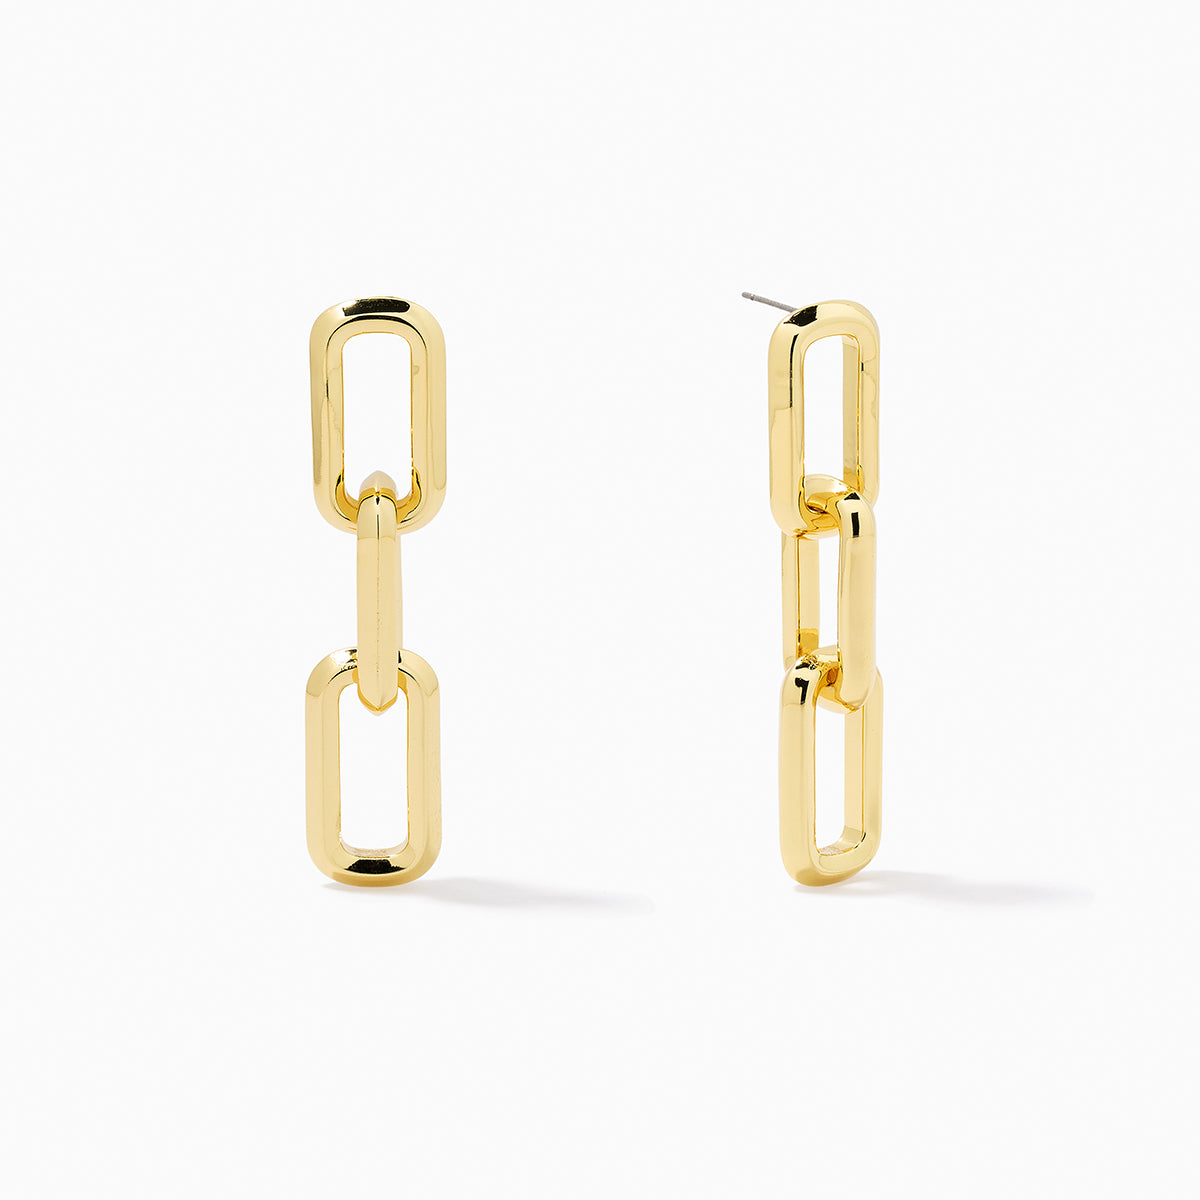 Triple Link Earrings | Gold | Product Image | Uncommon James